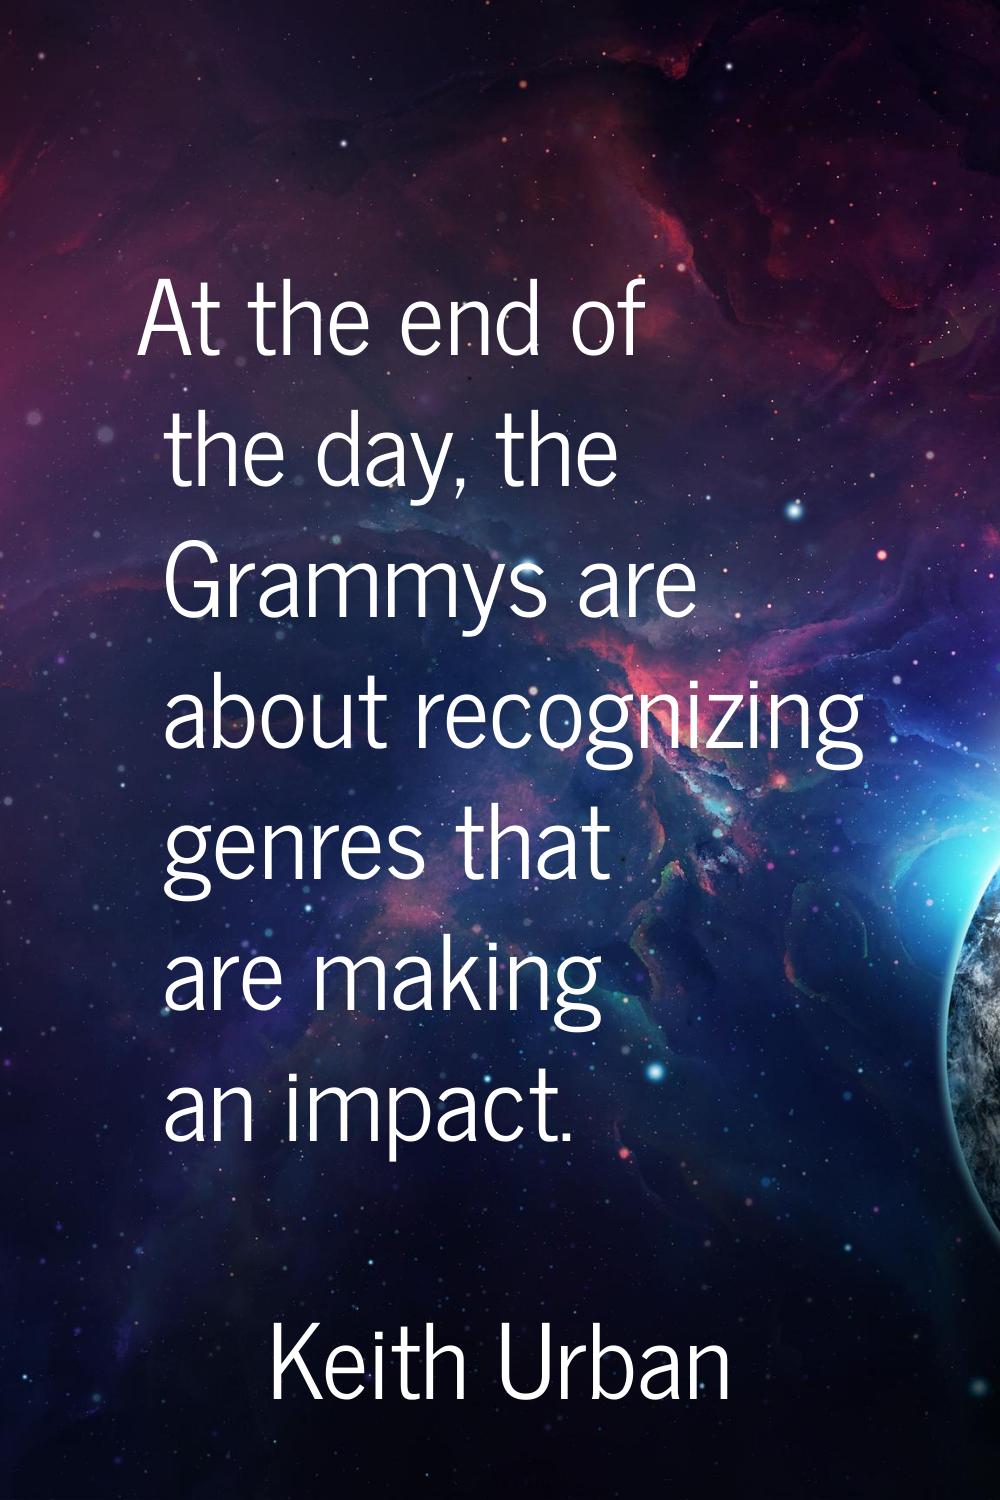 At the end of the day, the Grammys are about recognizing genres that are making an impact.